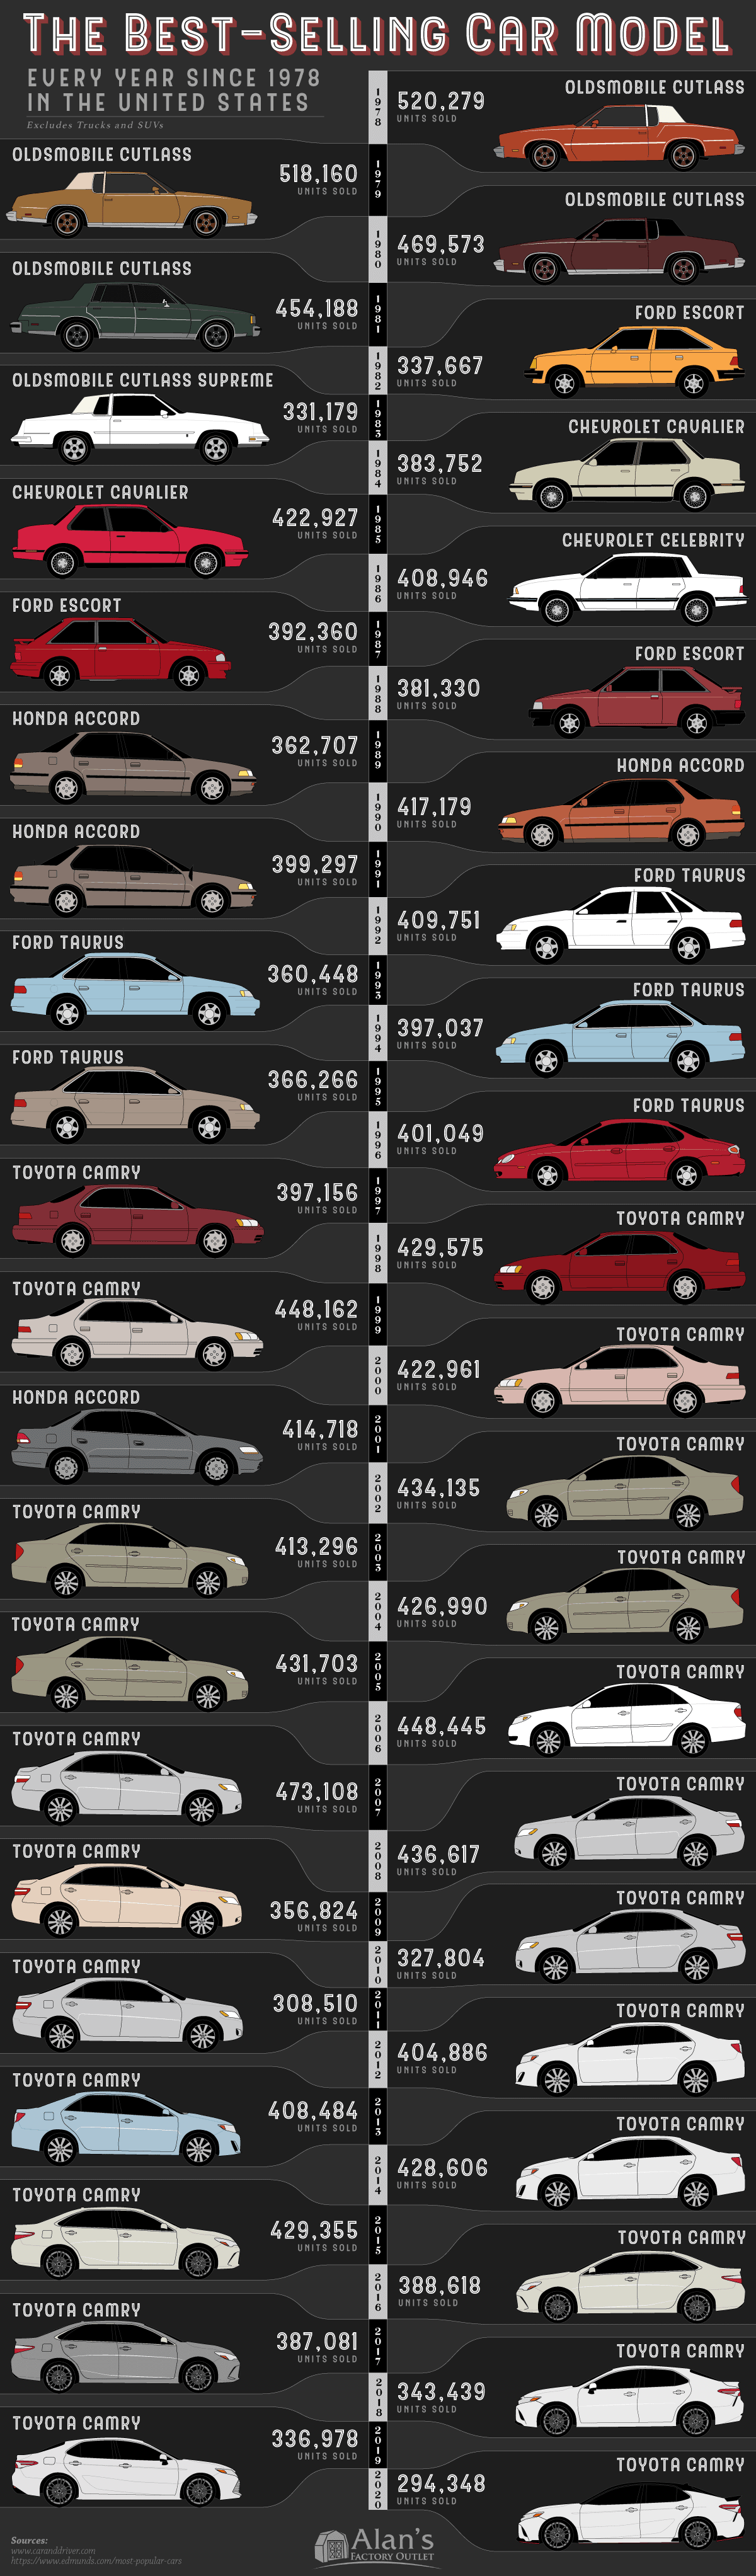 Best Selling Car Model Every Year Since 1978